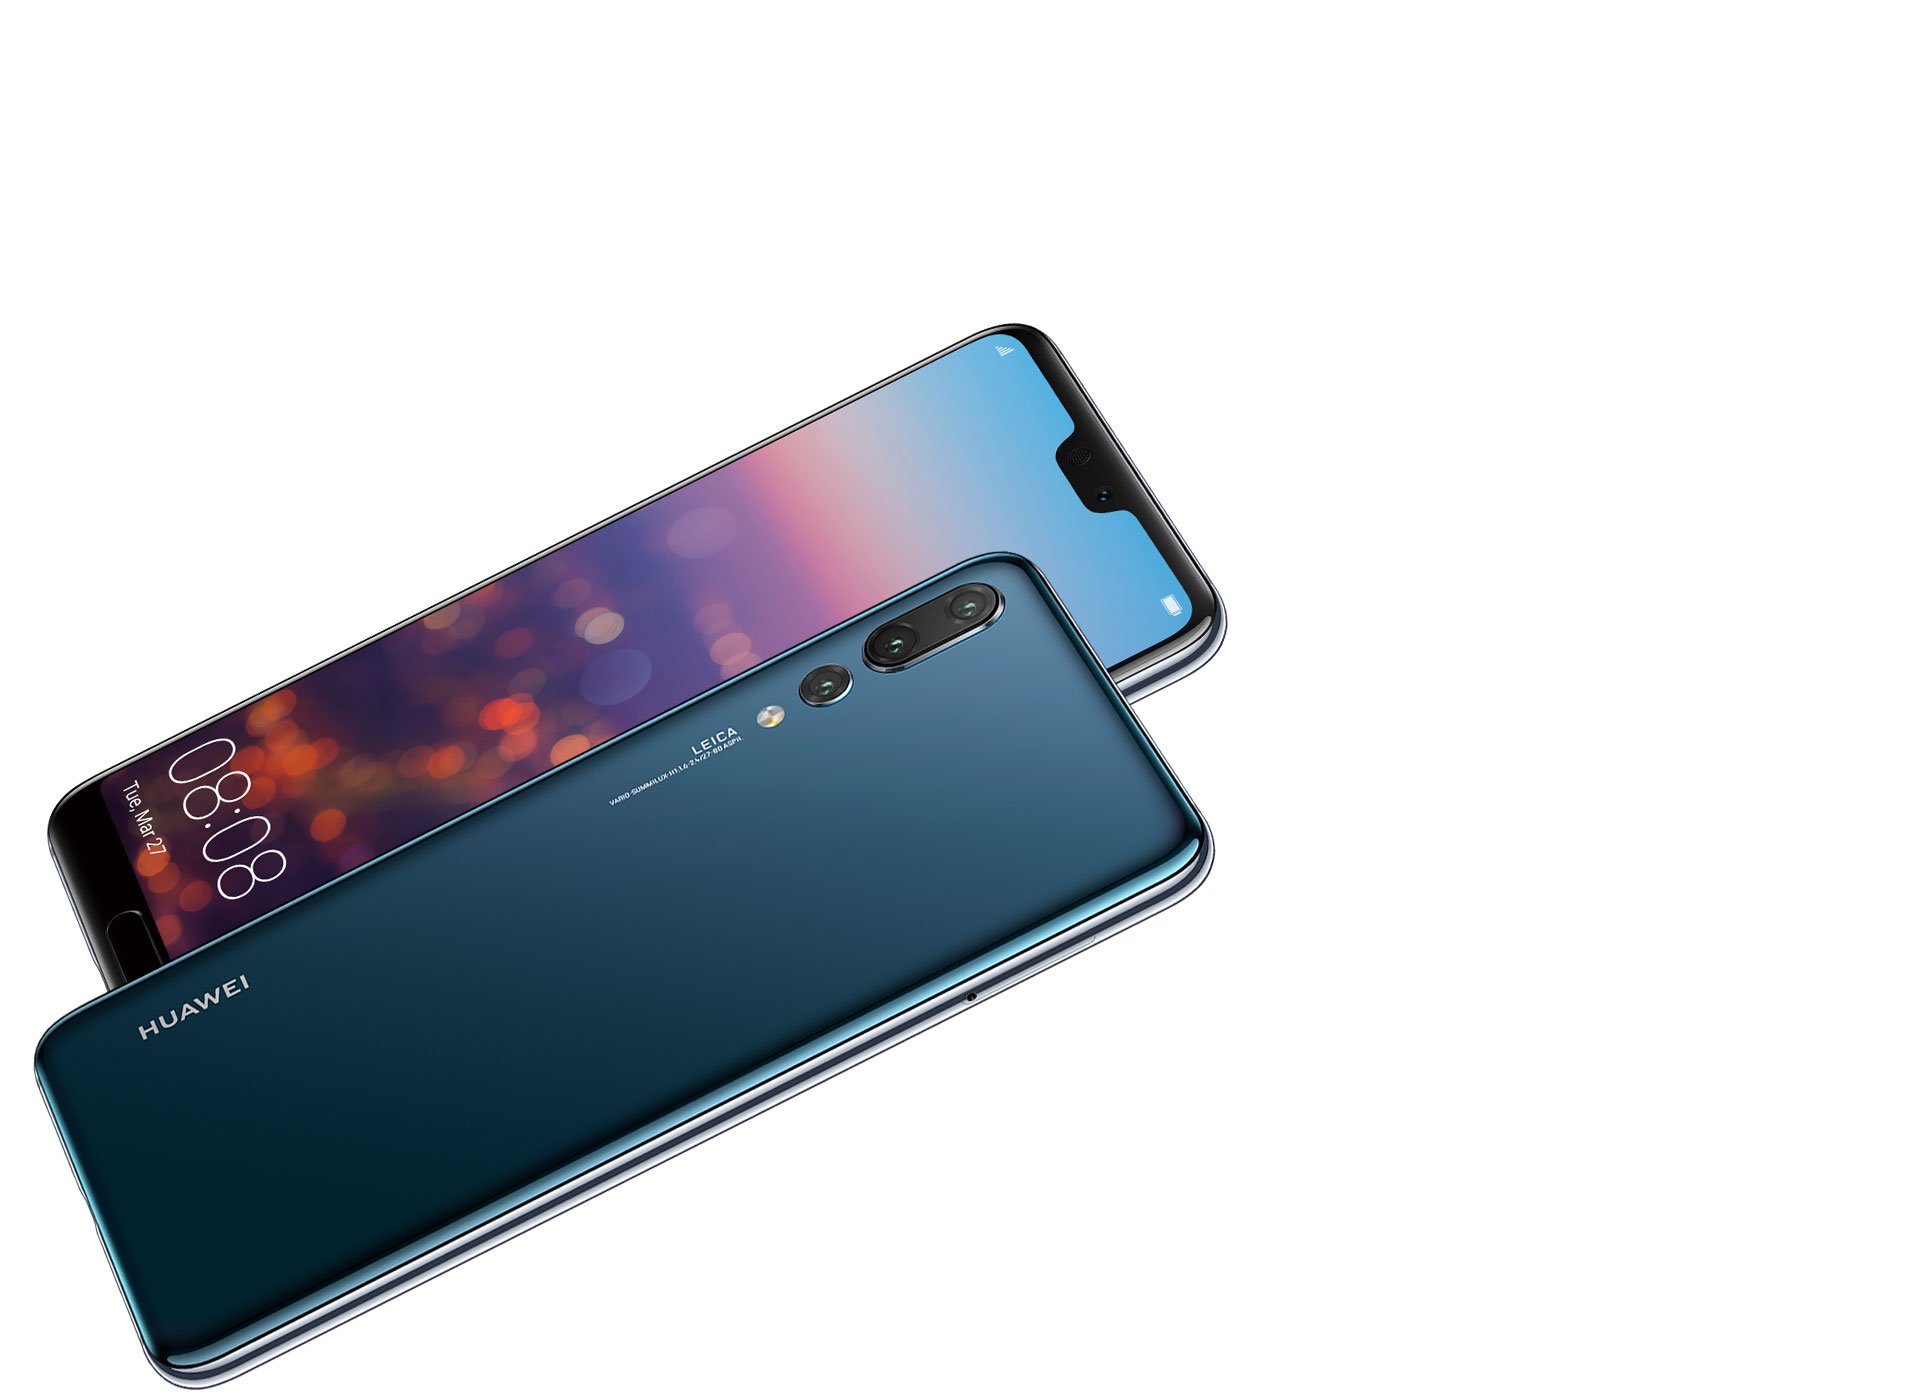 Huawei P20 Pro specs, review, release date - PhonesData